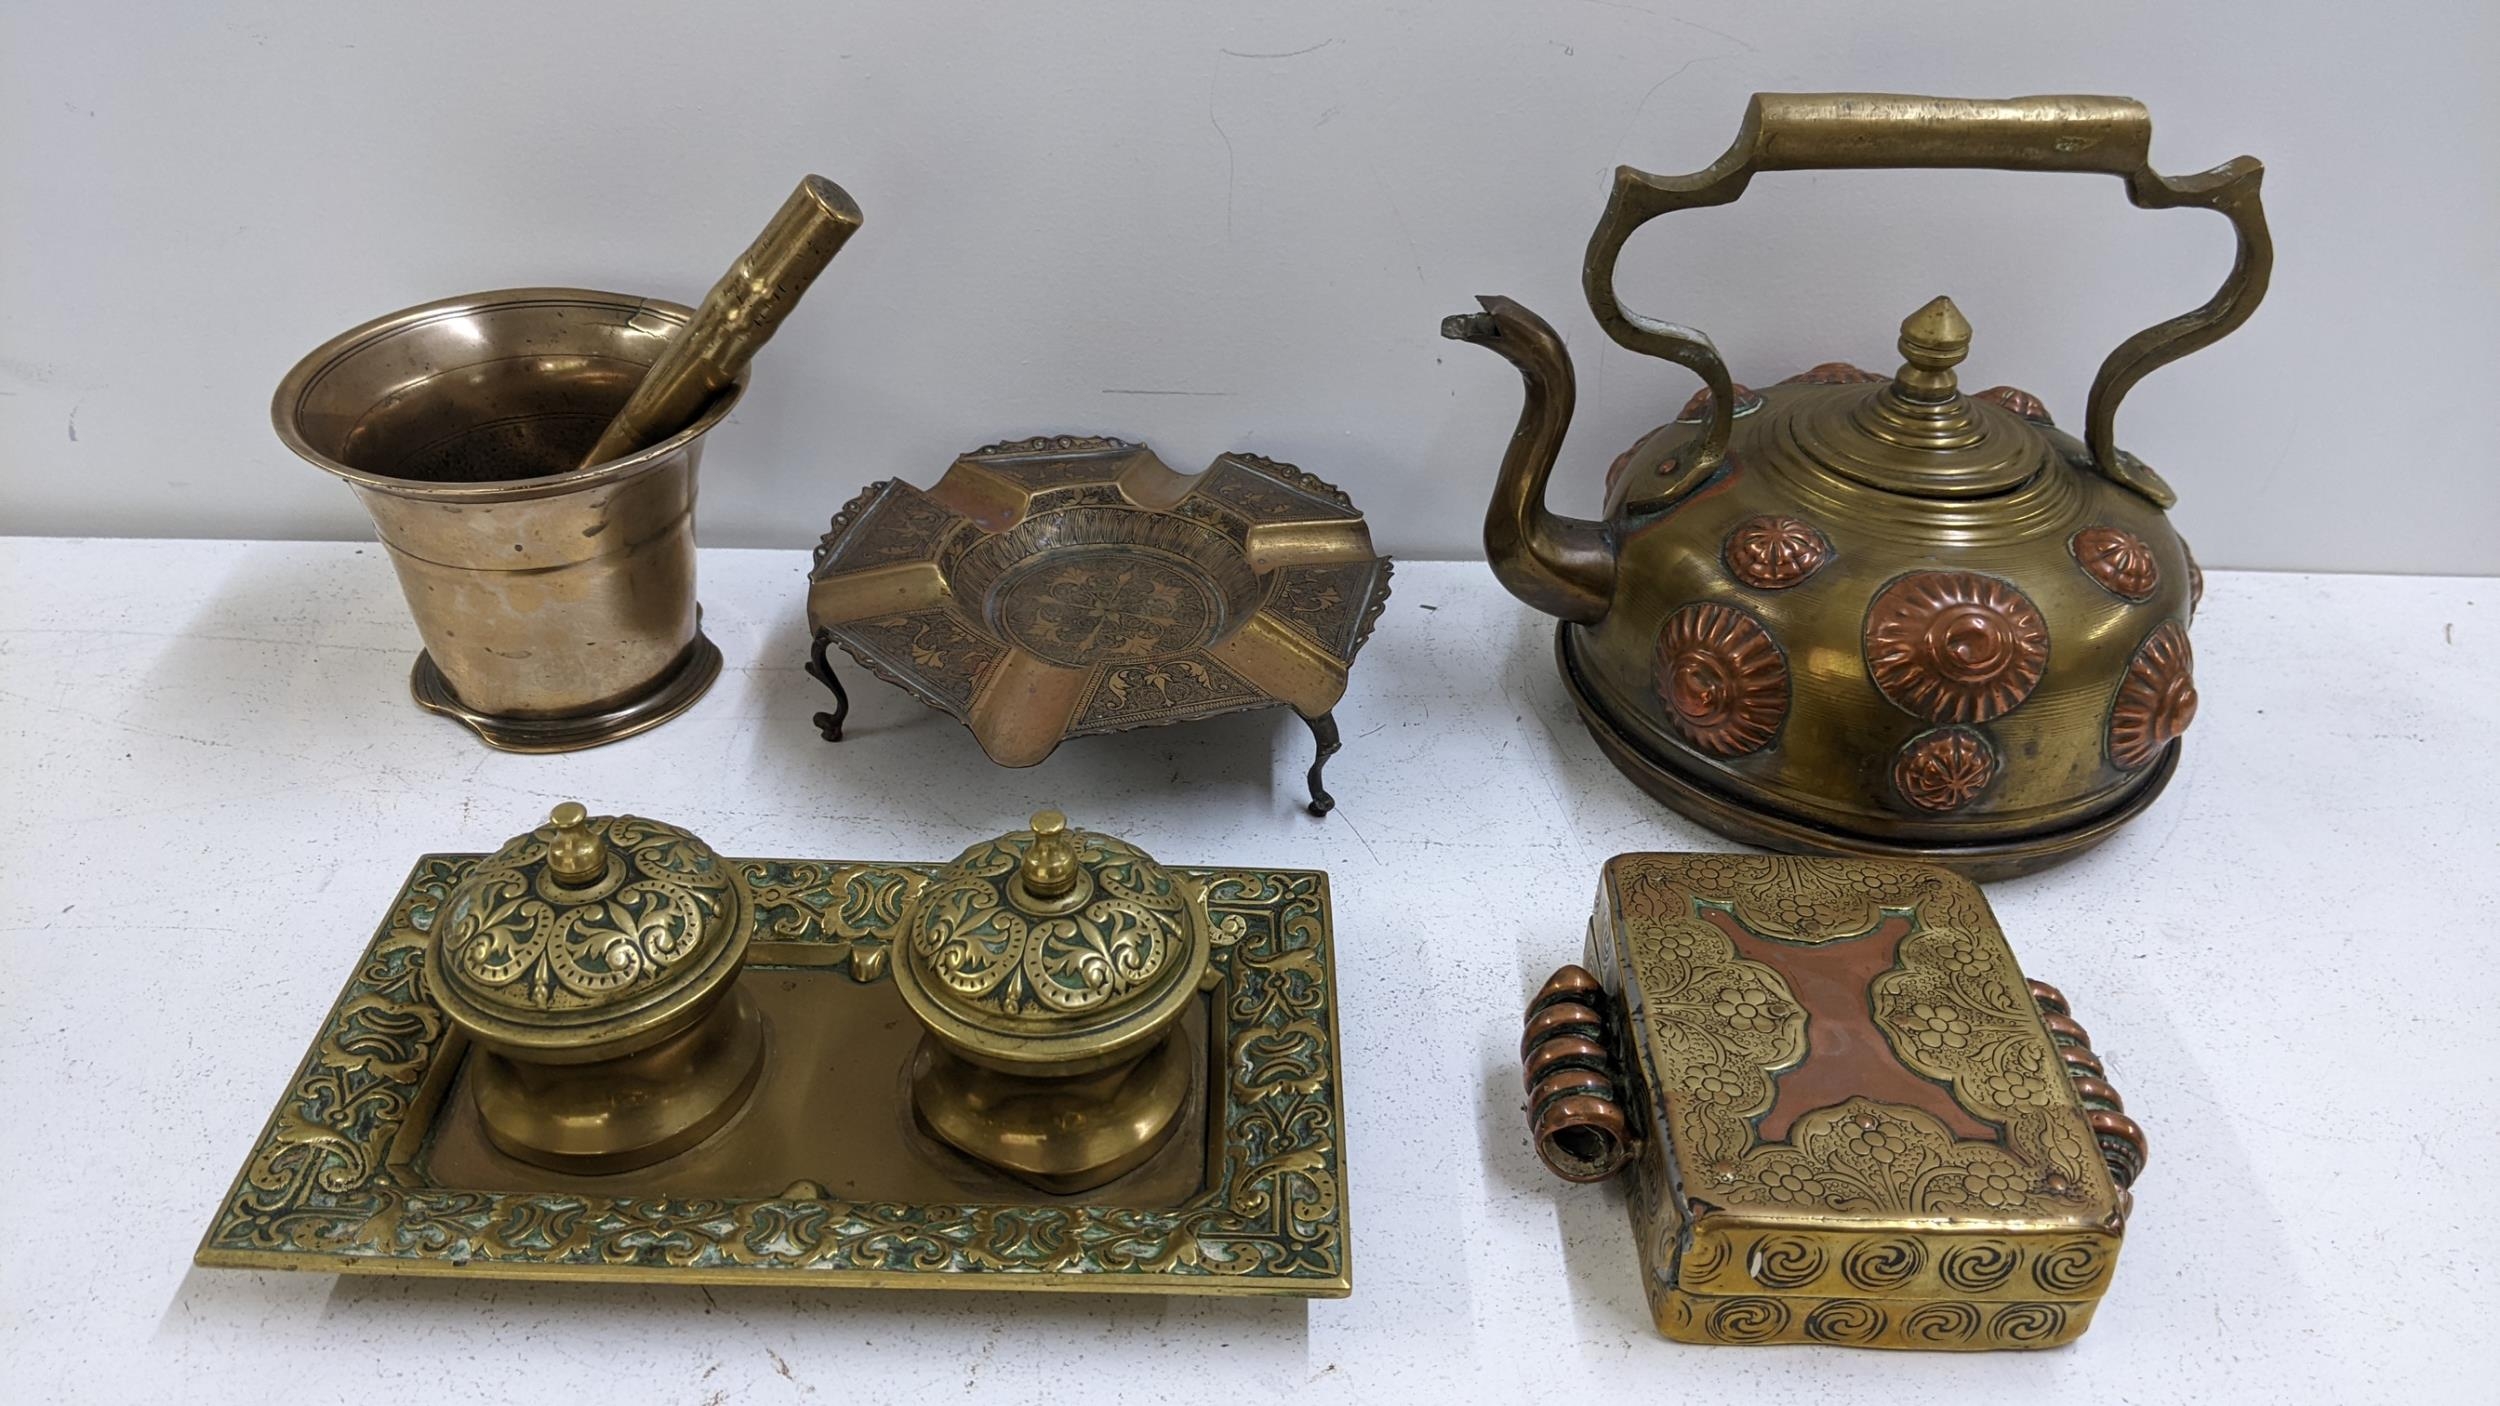 Mixed metalware to include an 18th century bronze pestle and mortar, a Tibetan brass and copper